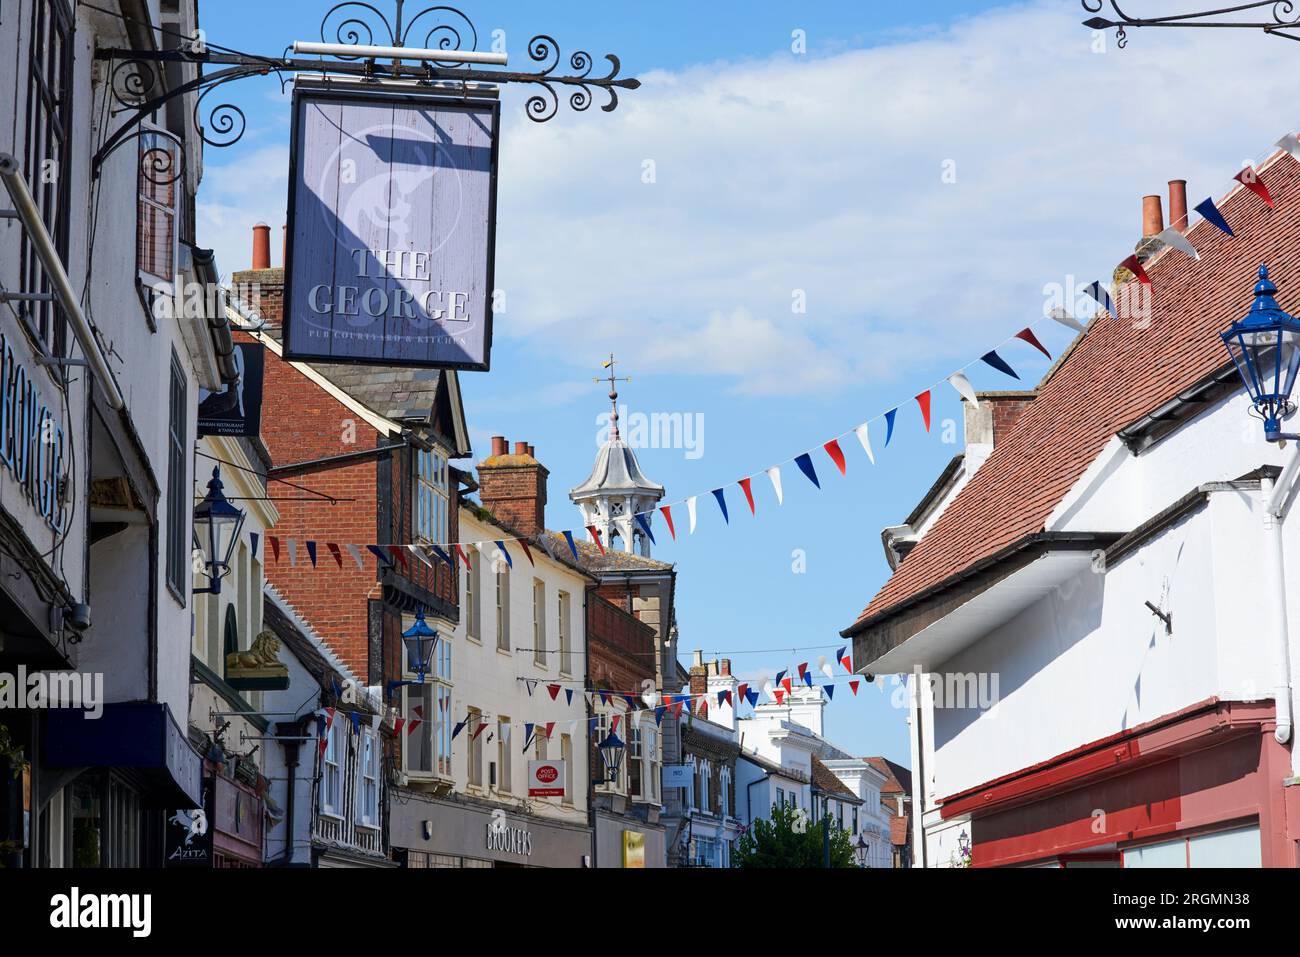 Pub sign and old buildings on Bucklersbury, Hitchin, Hertfordshire, UK Stock Photo